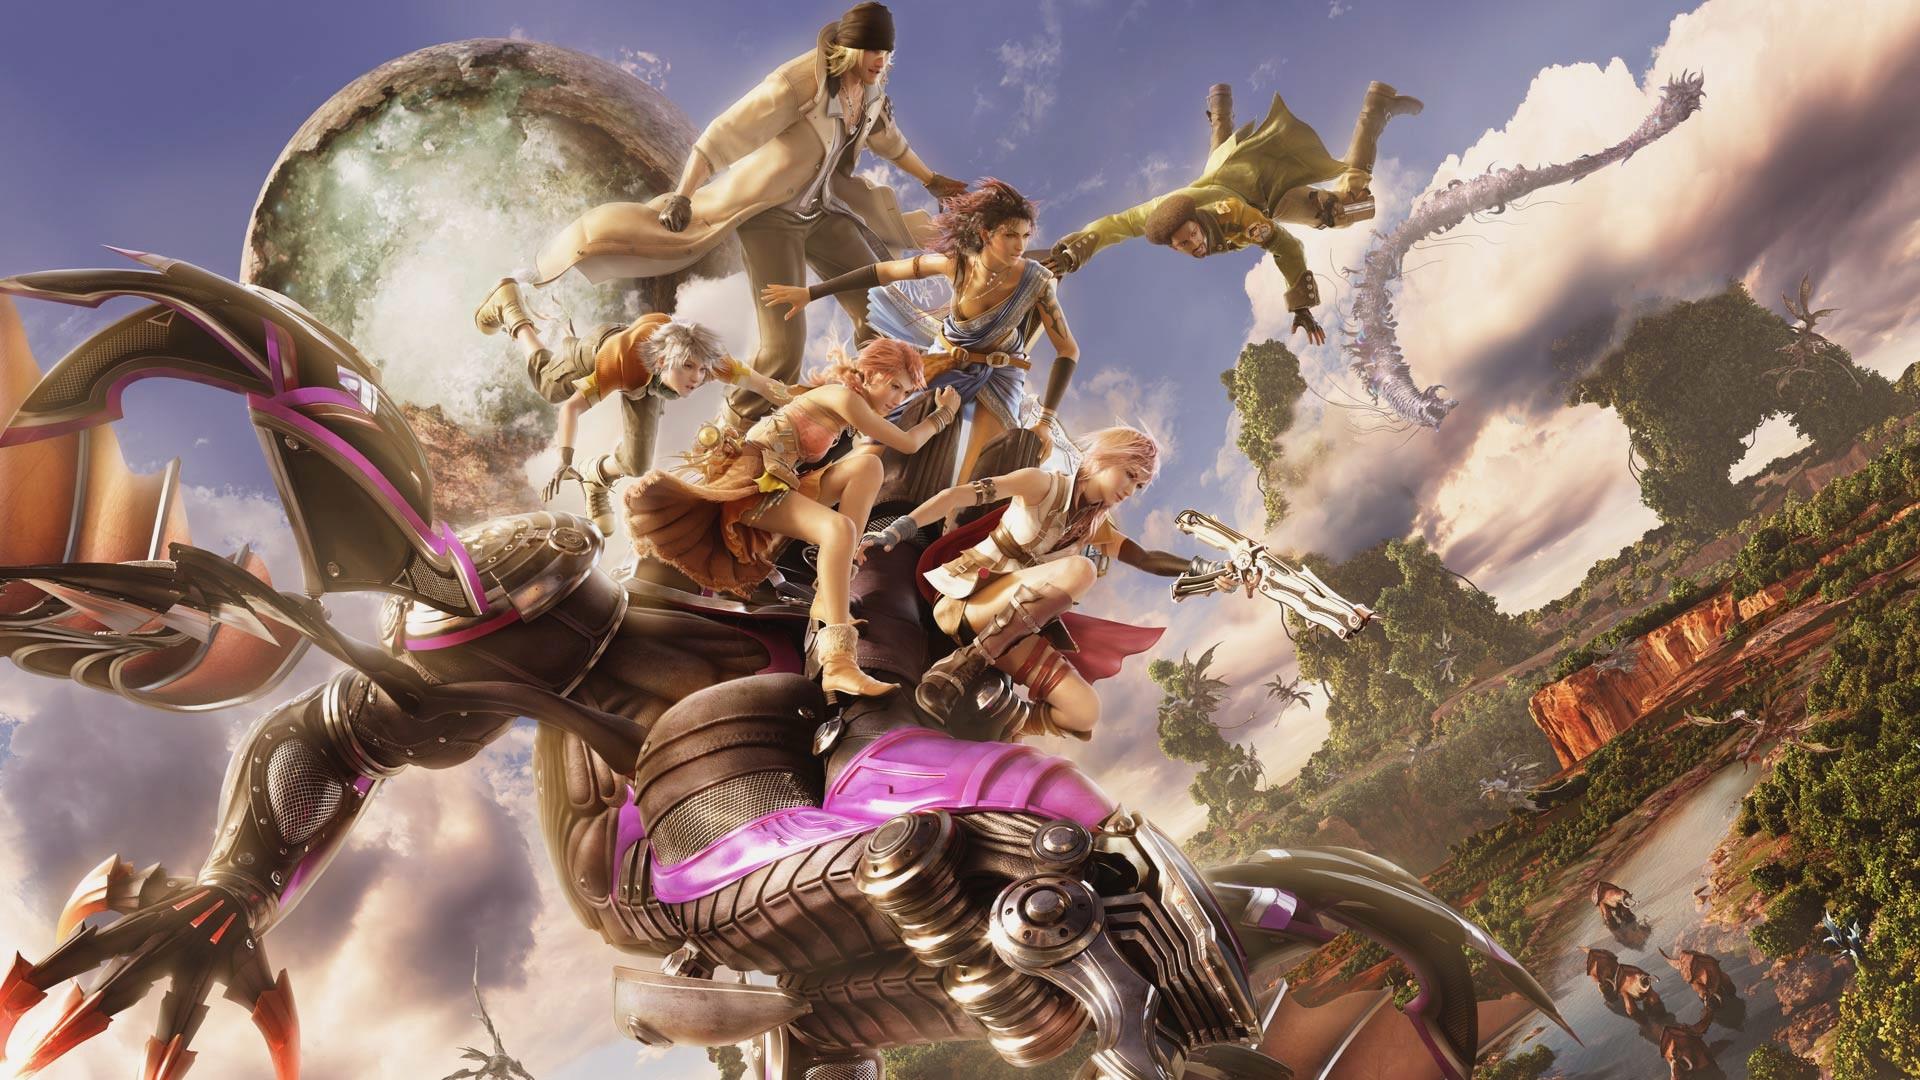 epic wallpapers,cg artwork,mythology,fictional character,strategy video game,games